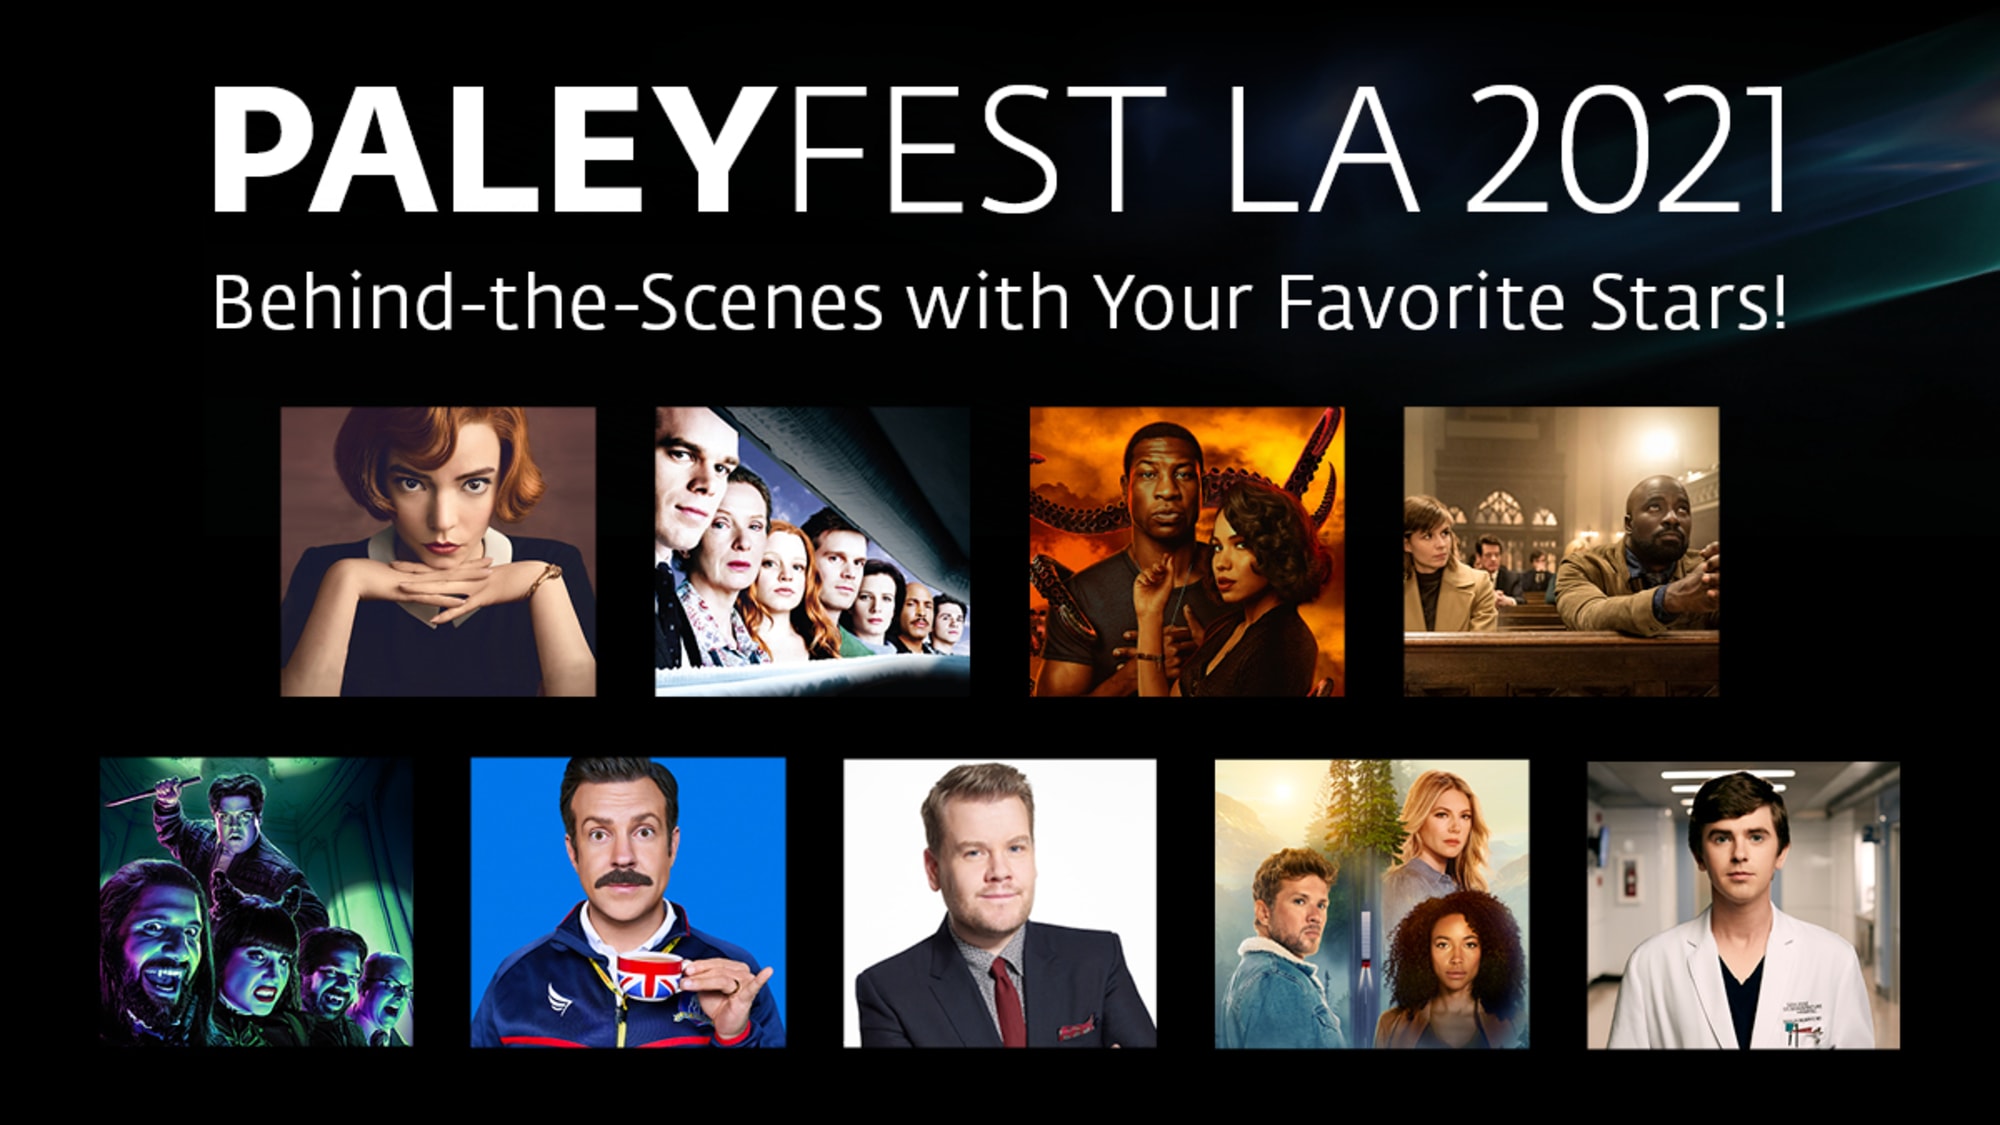 PaleyFest LA 2021 Preview this year's starstudded virtual event